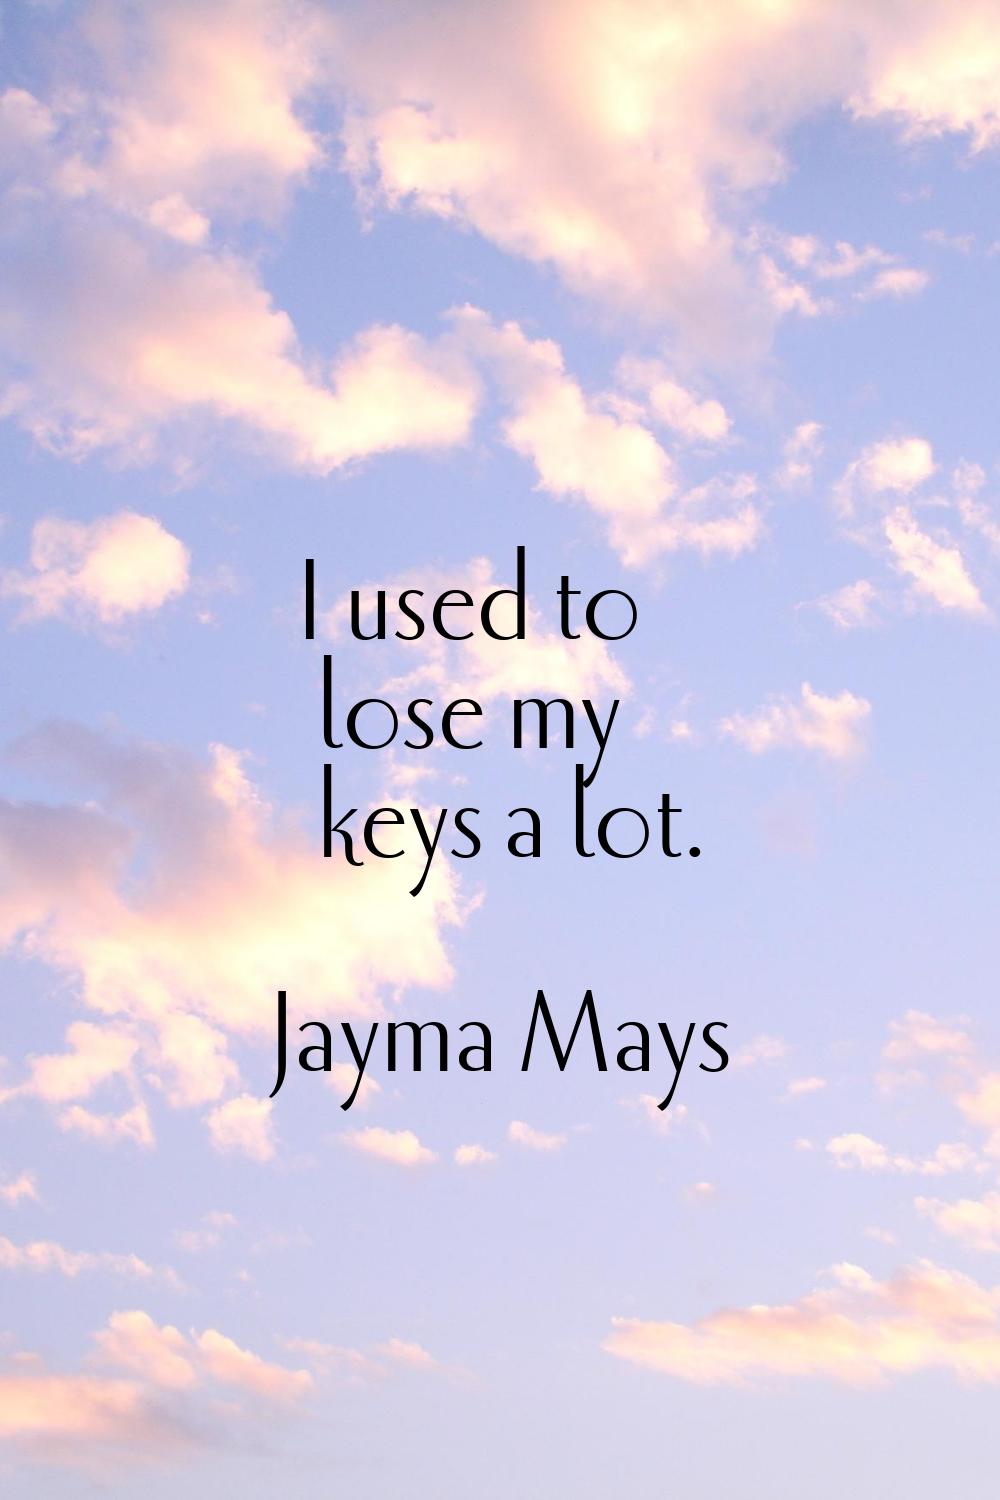 I used to lose my keys a lot.